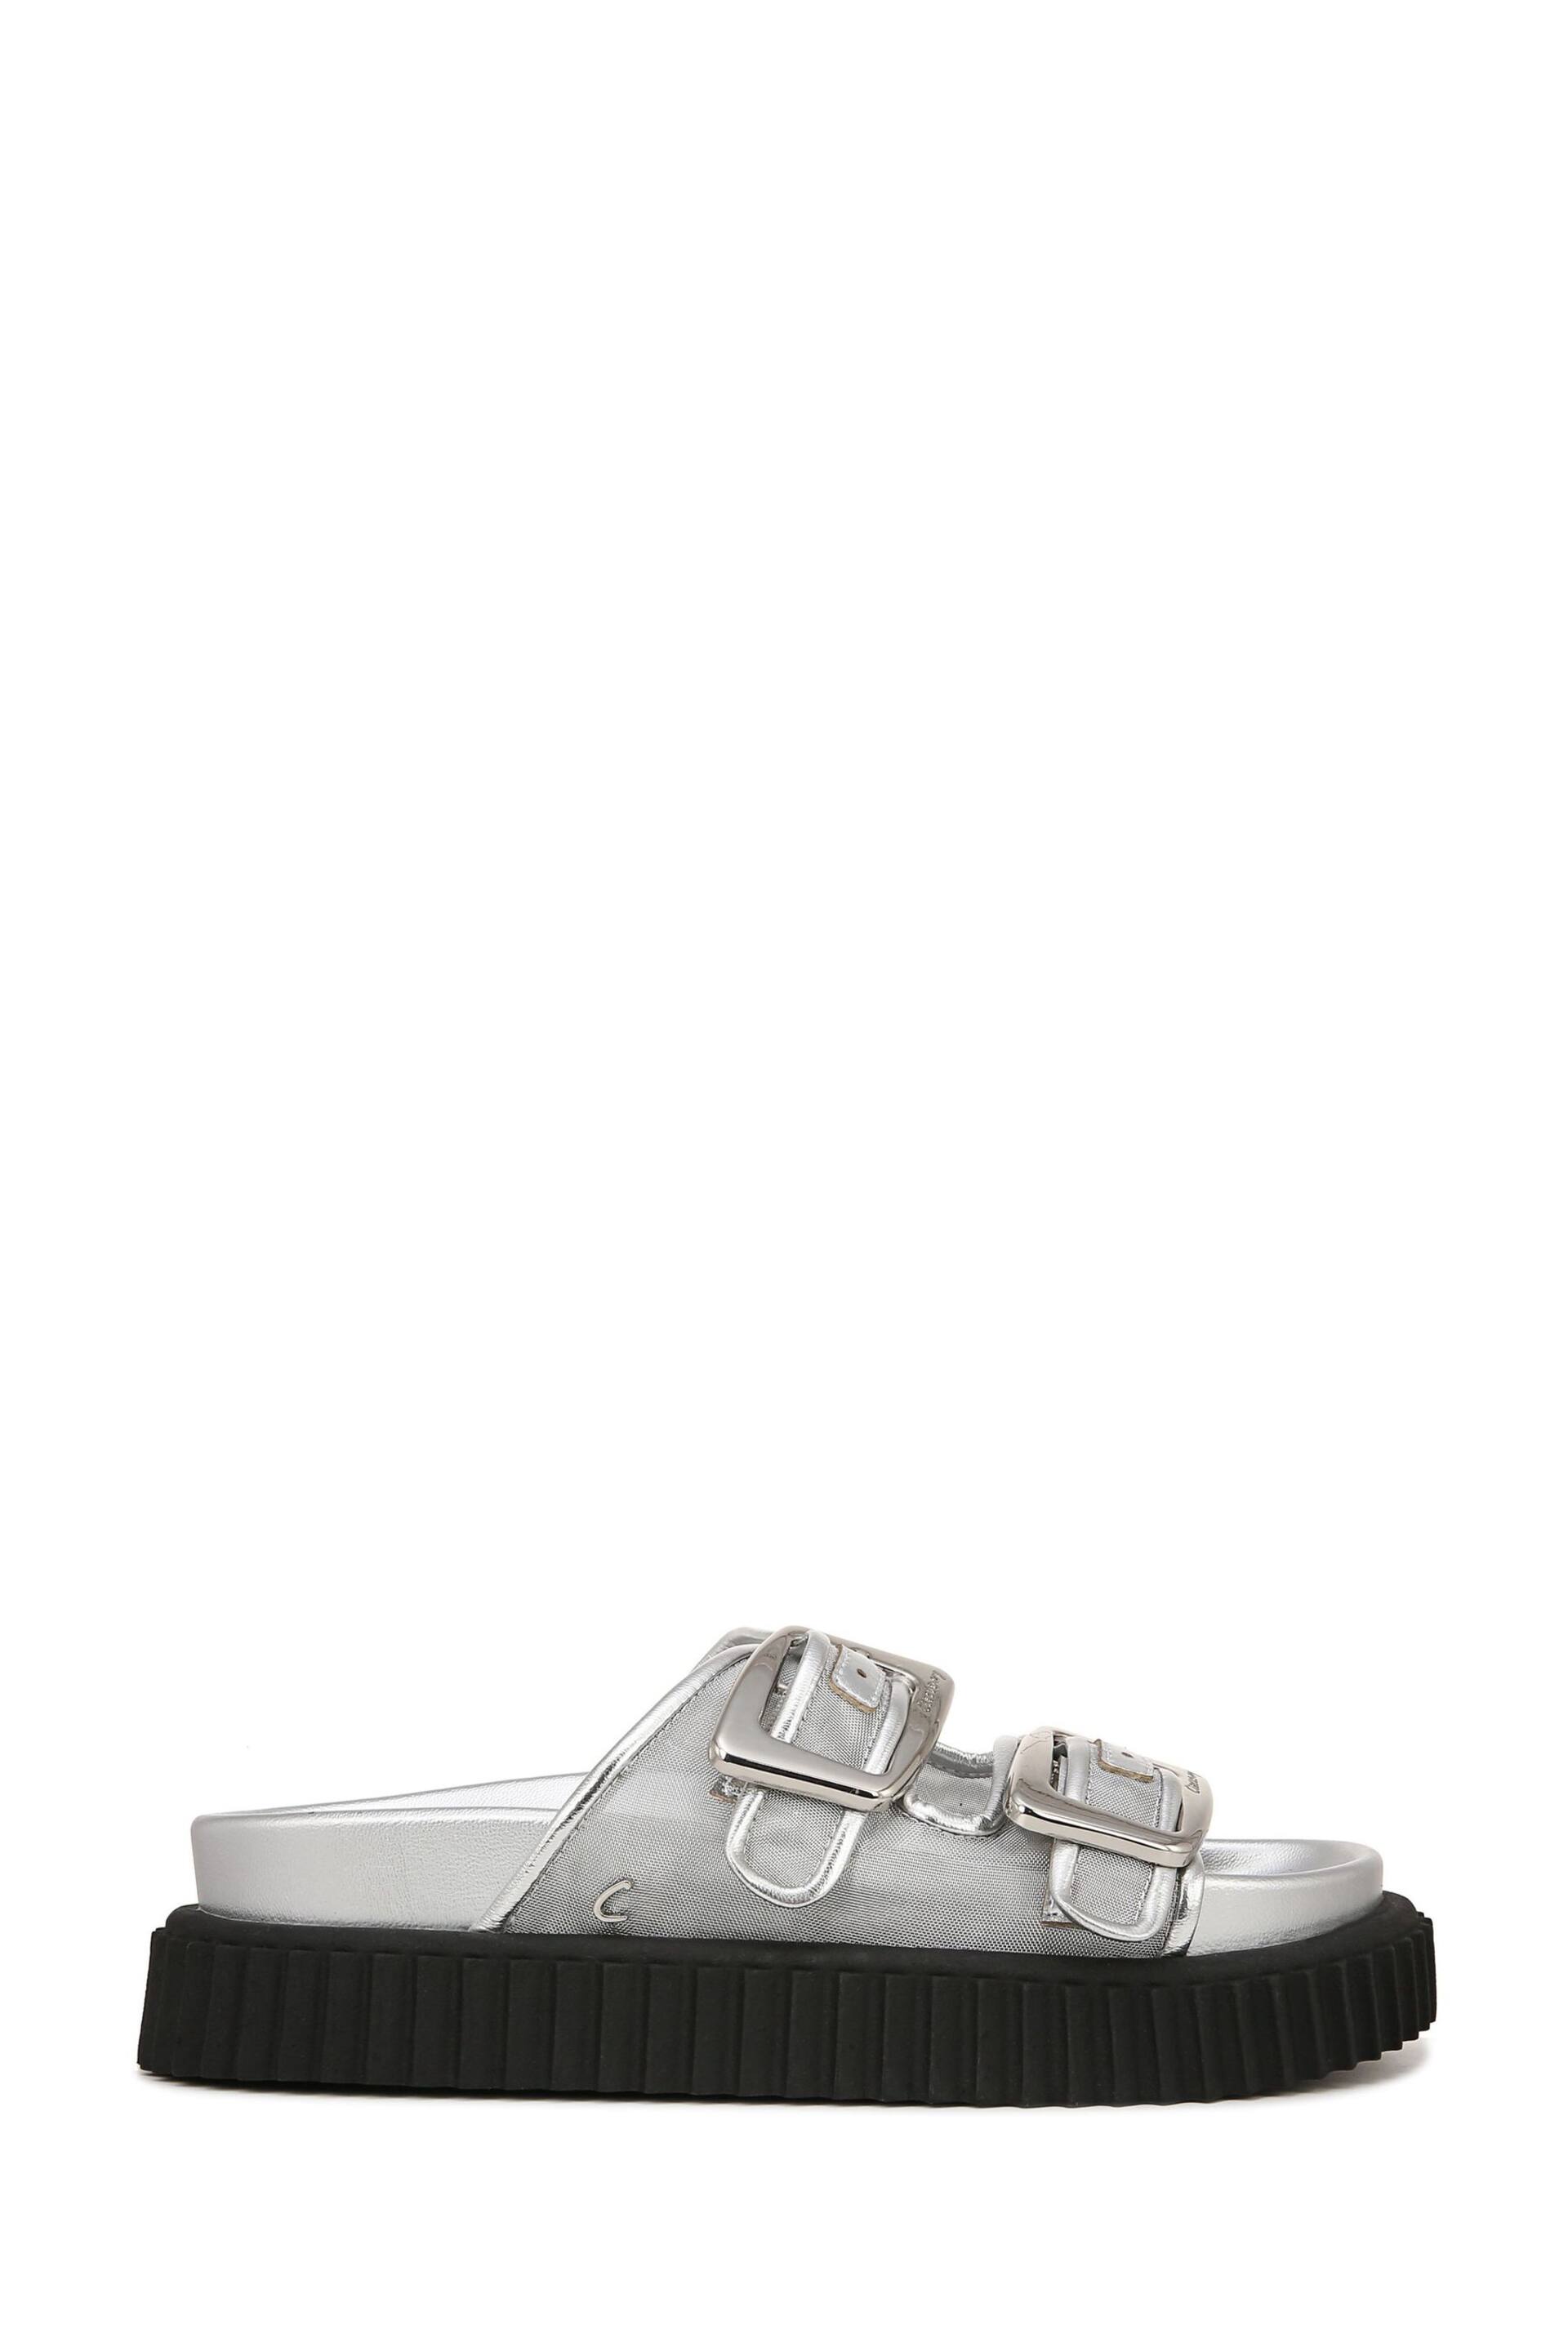 Circus NY Cris Mesh Slip-on Sandals - Image 1 of 7